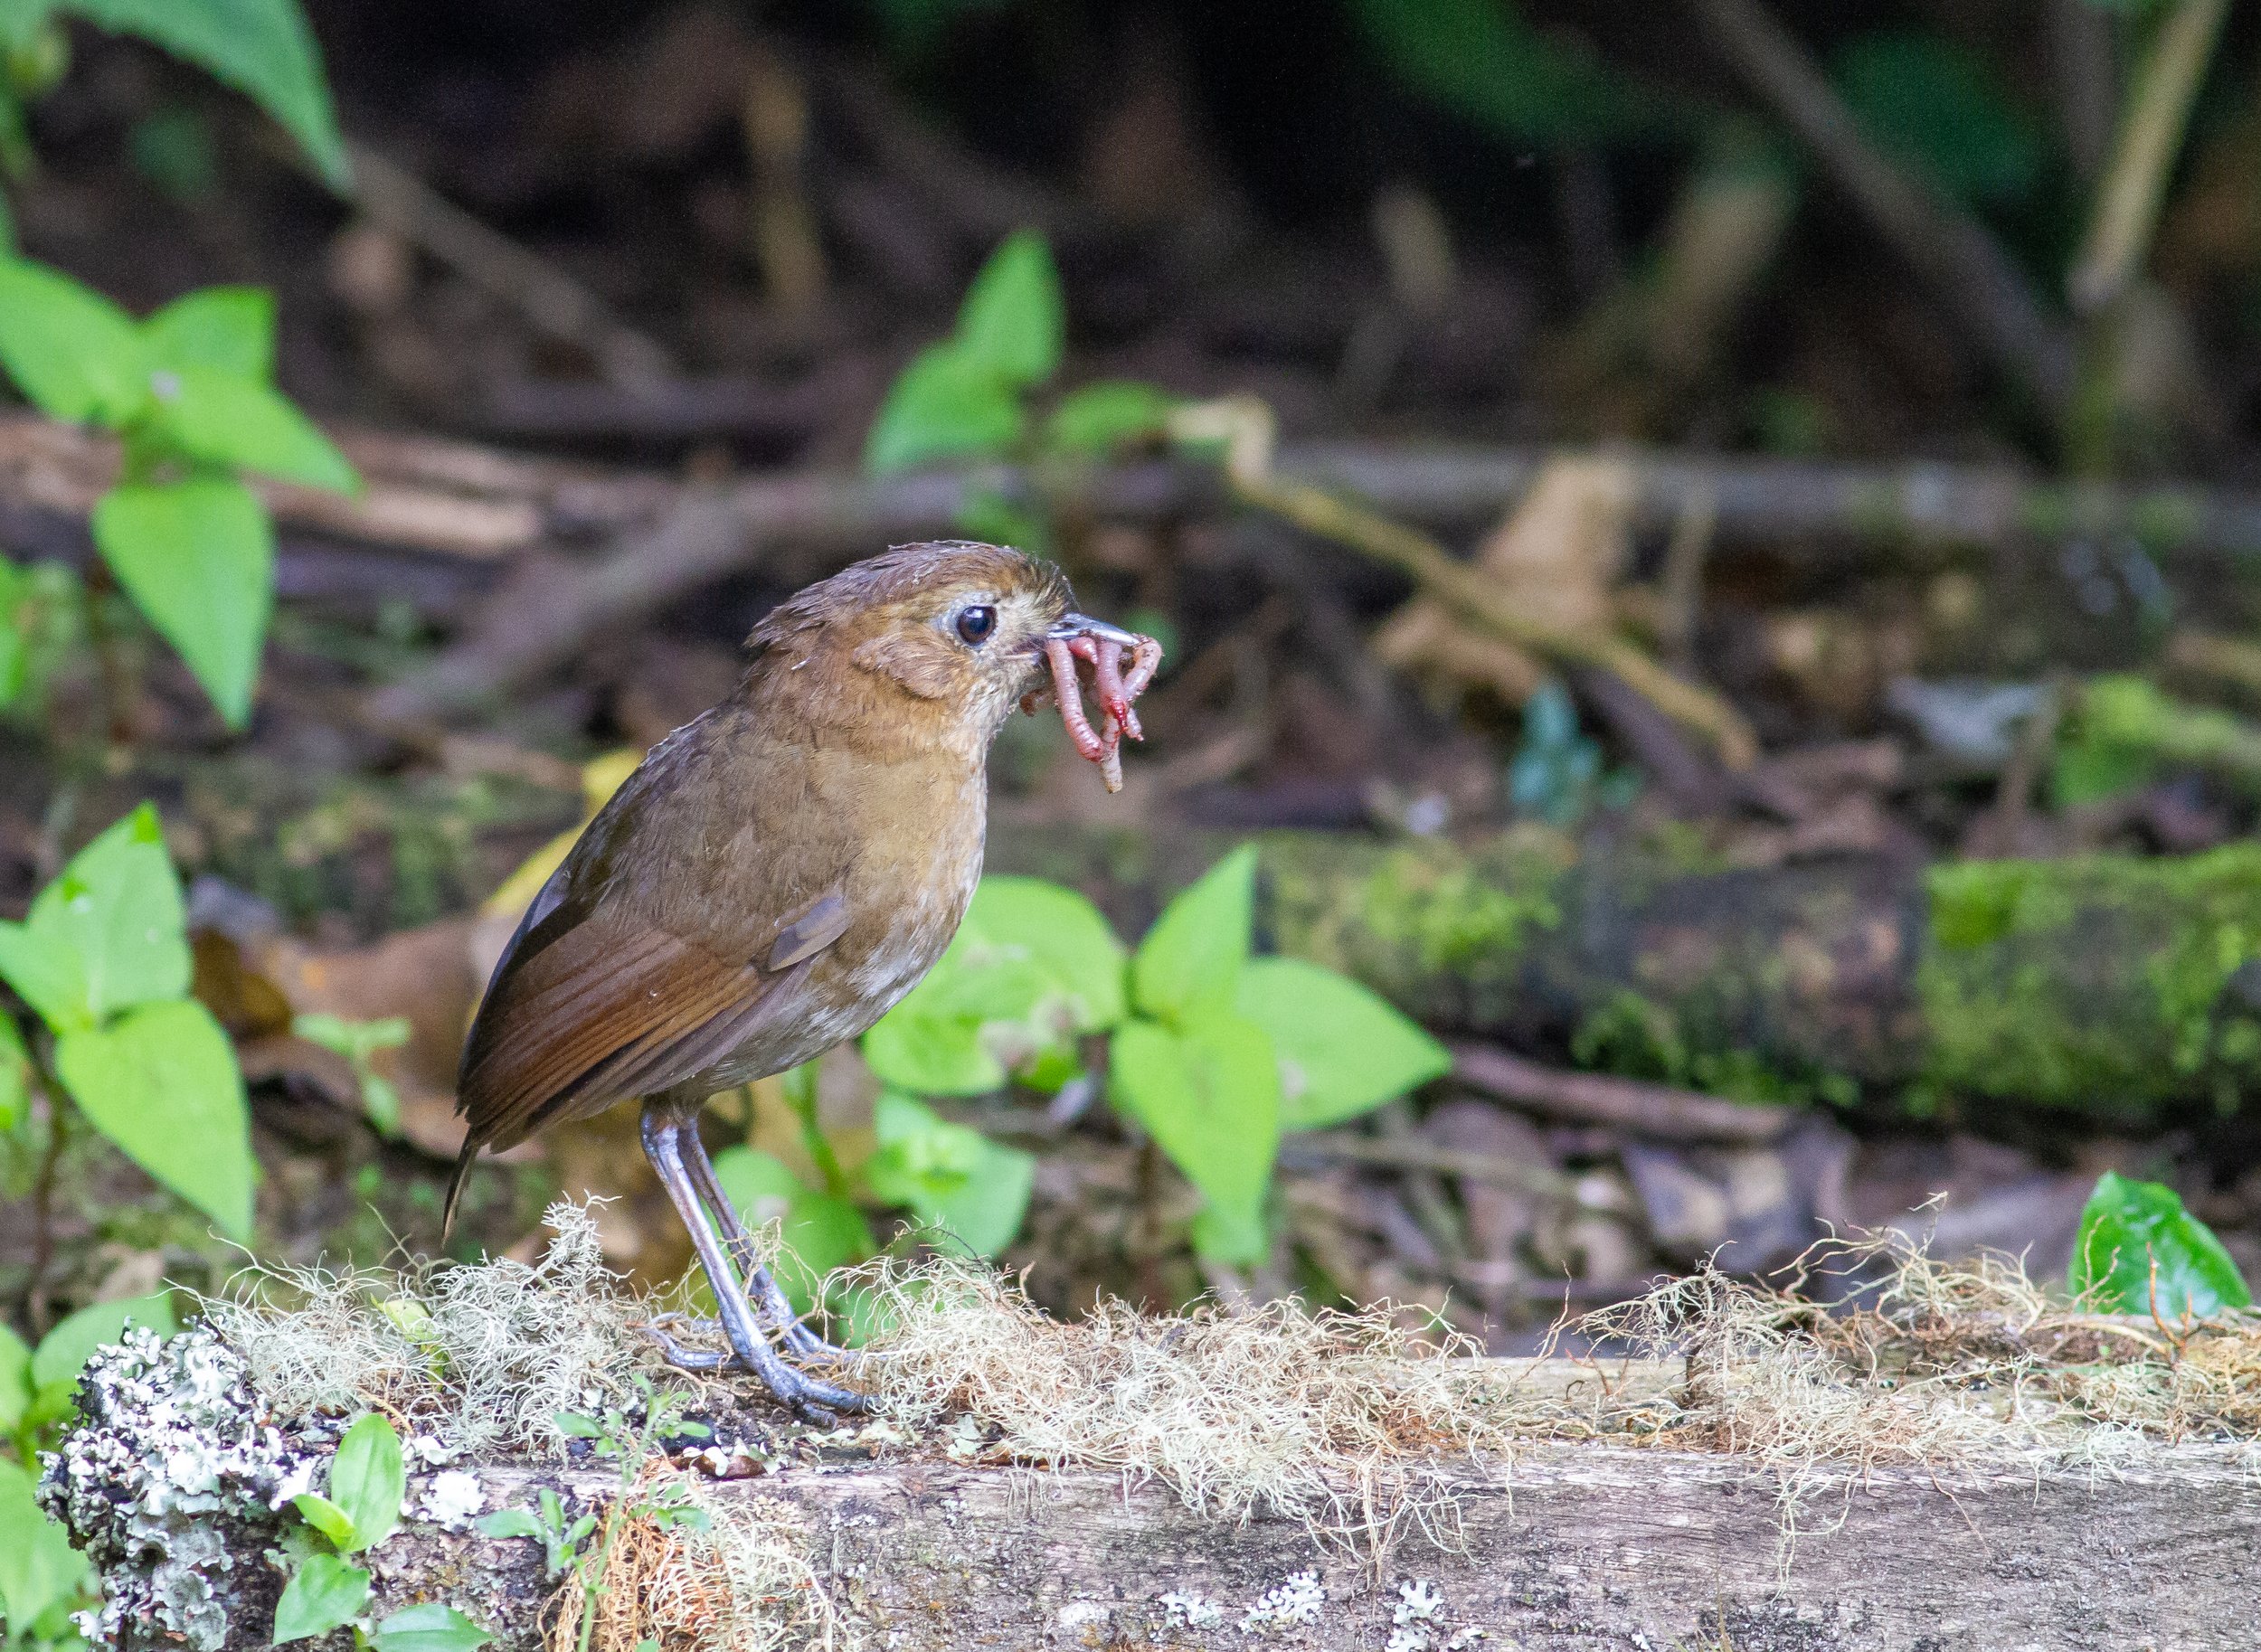 Brown-banded Antpitta